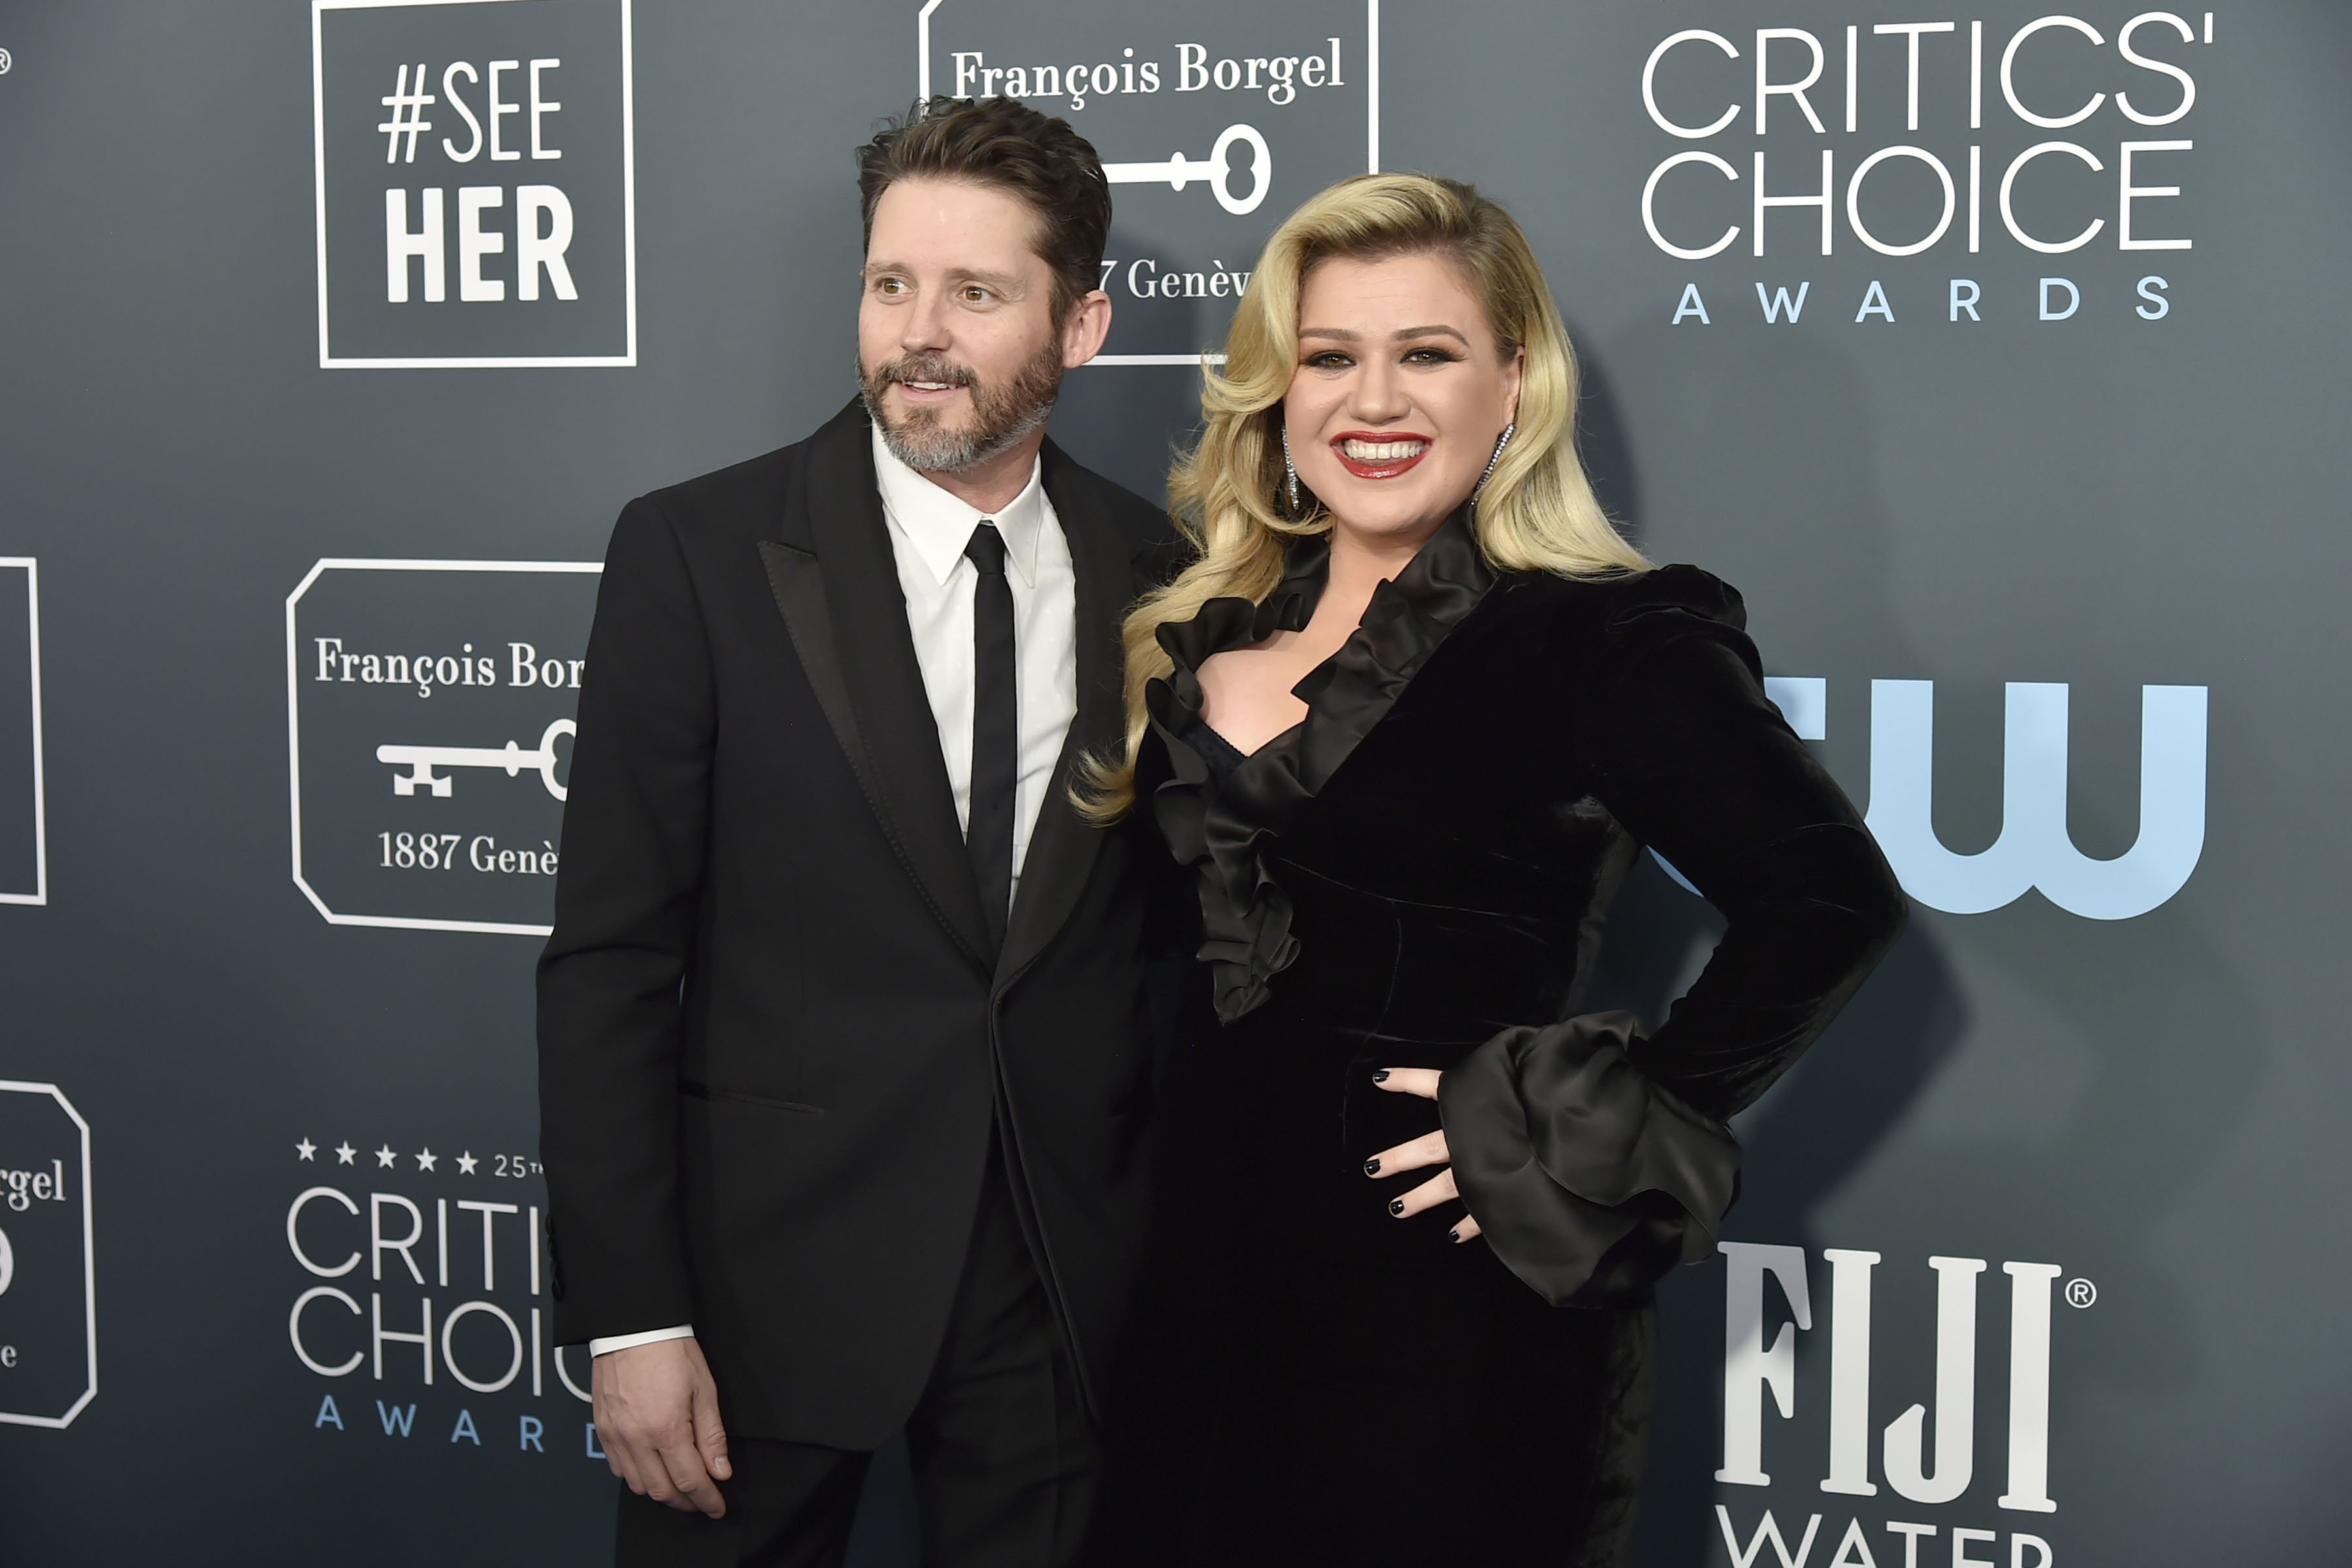 Brandon Blackstock and Kelly Clarkson attend the 25th Annual Critics' Choice Awards at Barker Hangar on January 12, 2020 in Santa Monica, California. | Photo: Getty Images